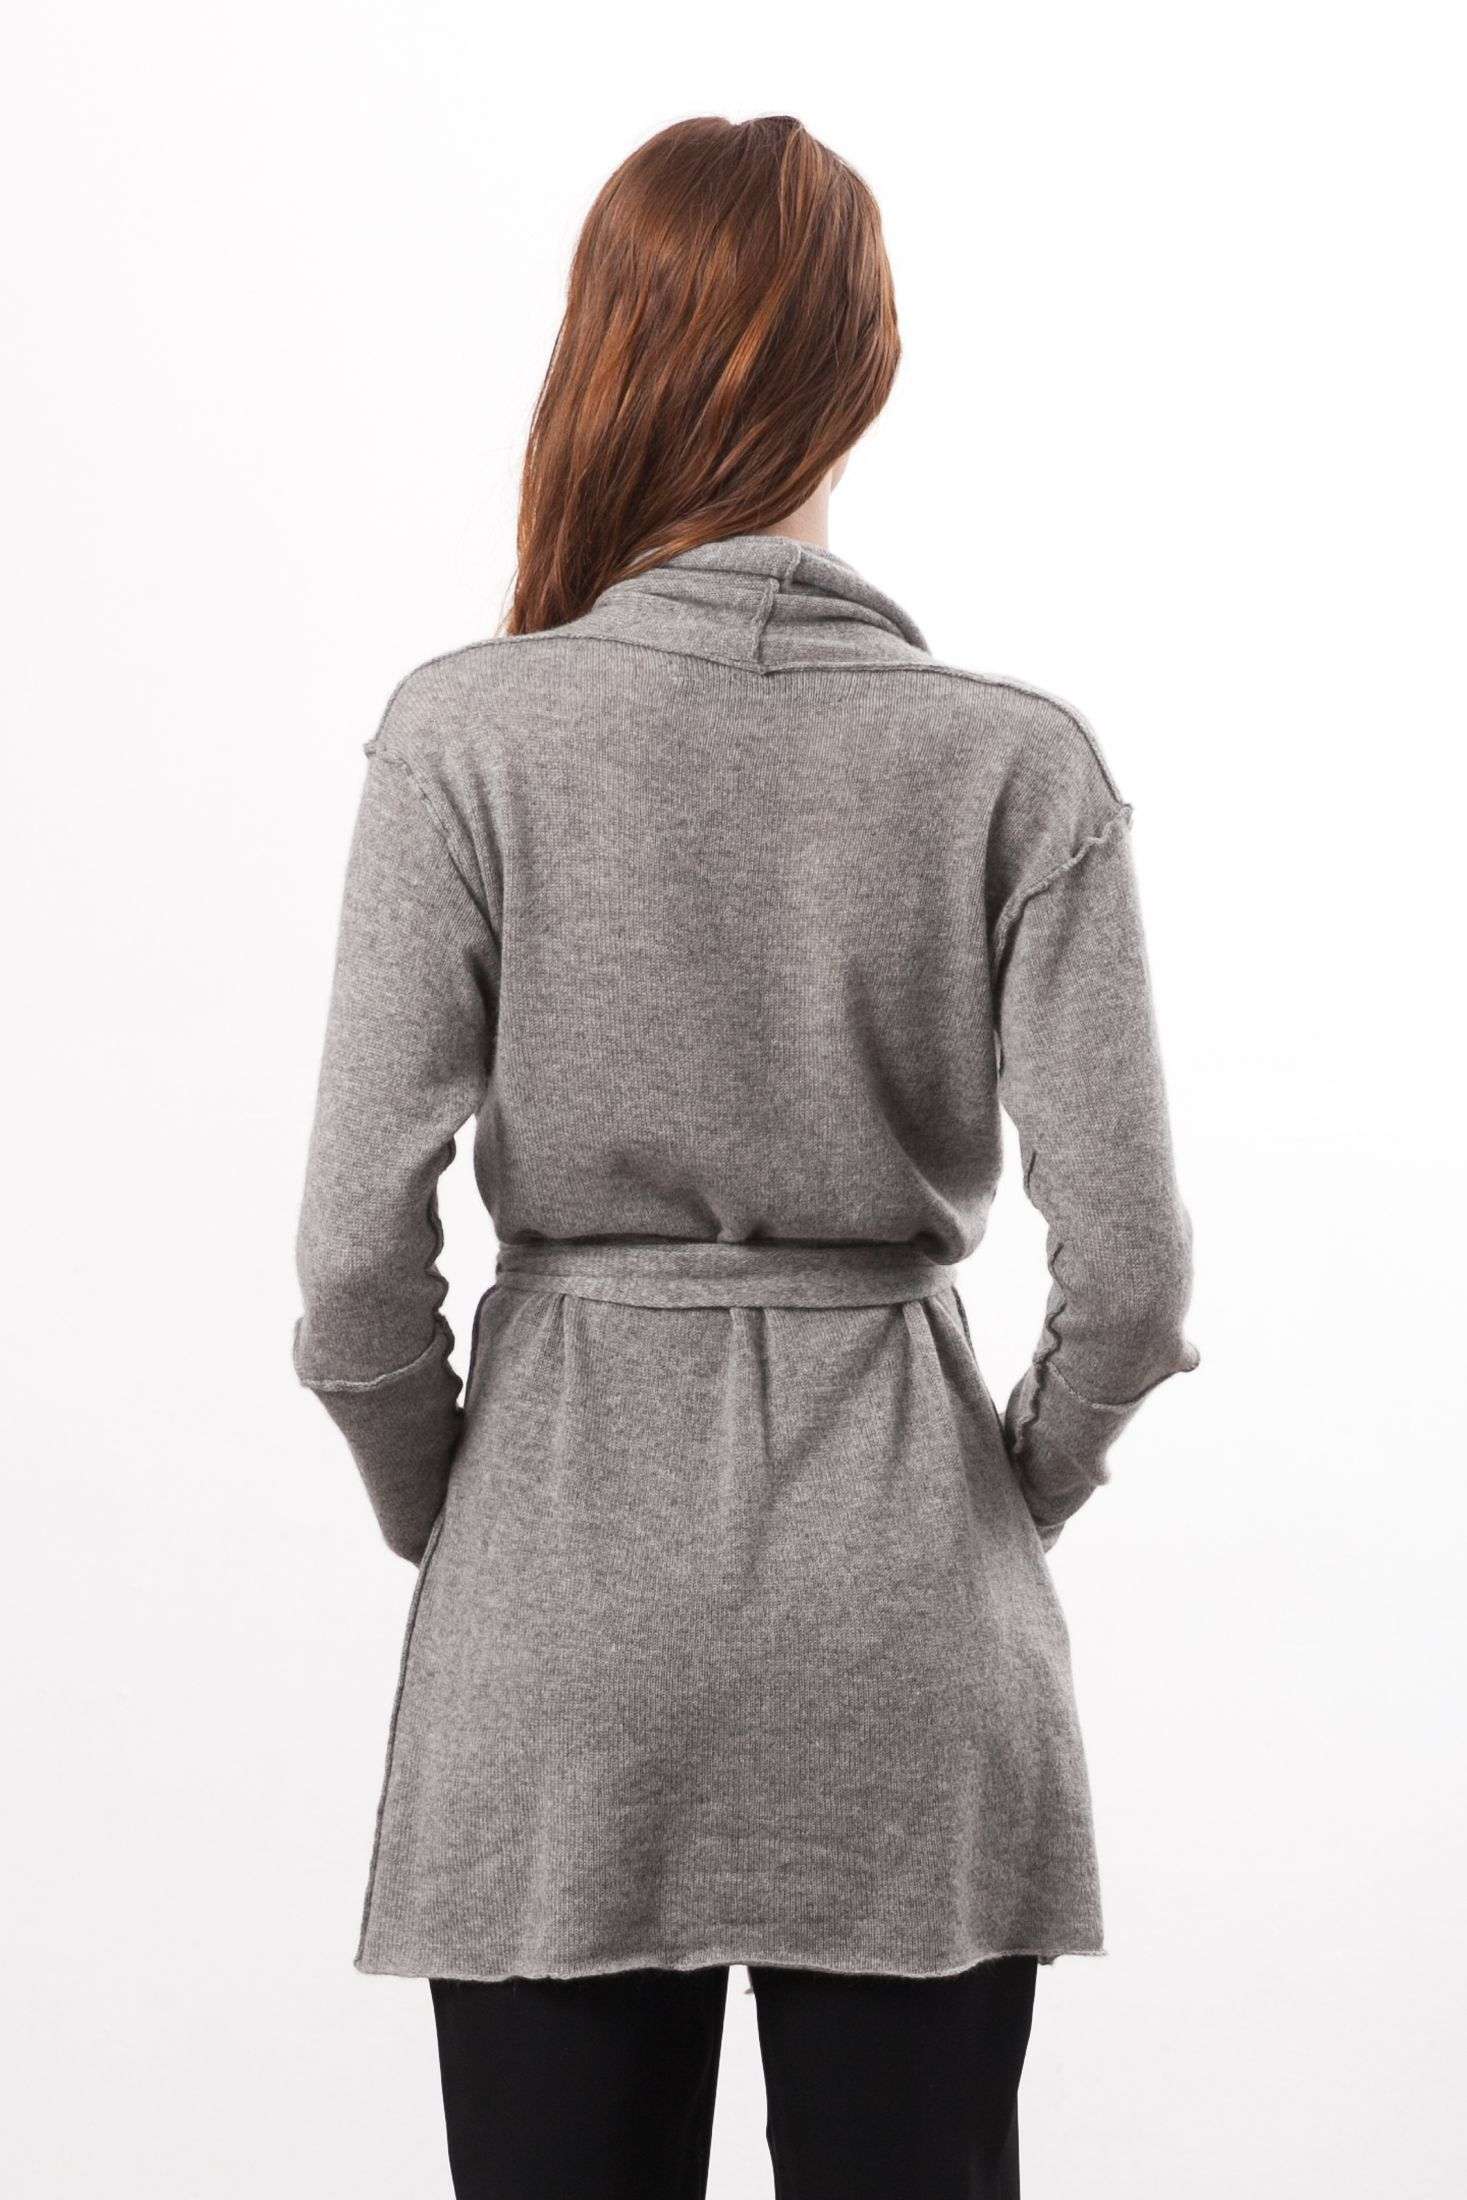 Cashmere wrap cardigan VANESSA in grey by Krista Elsta. Back view.